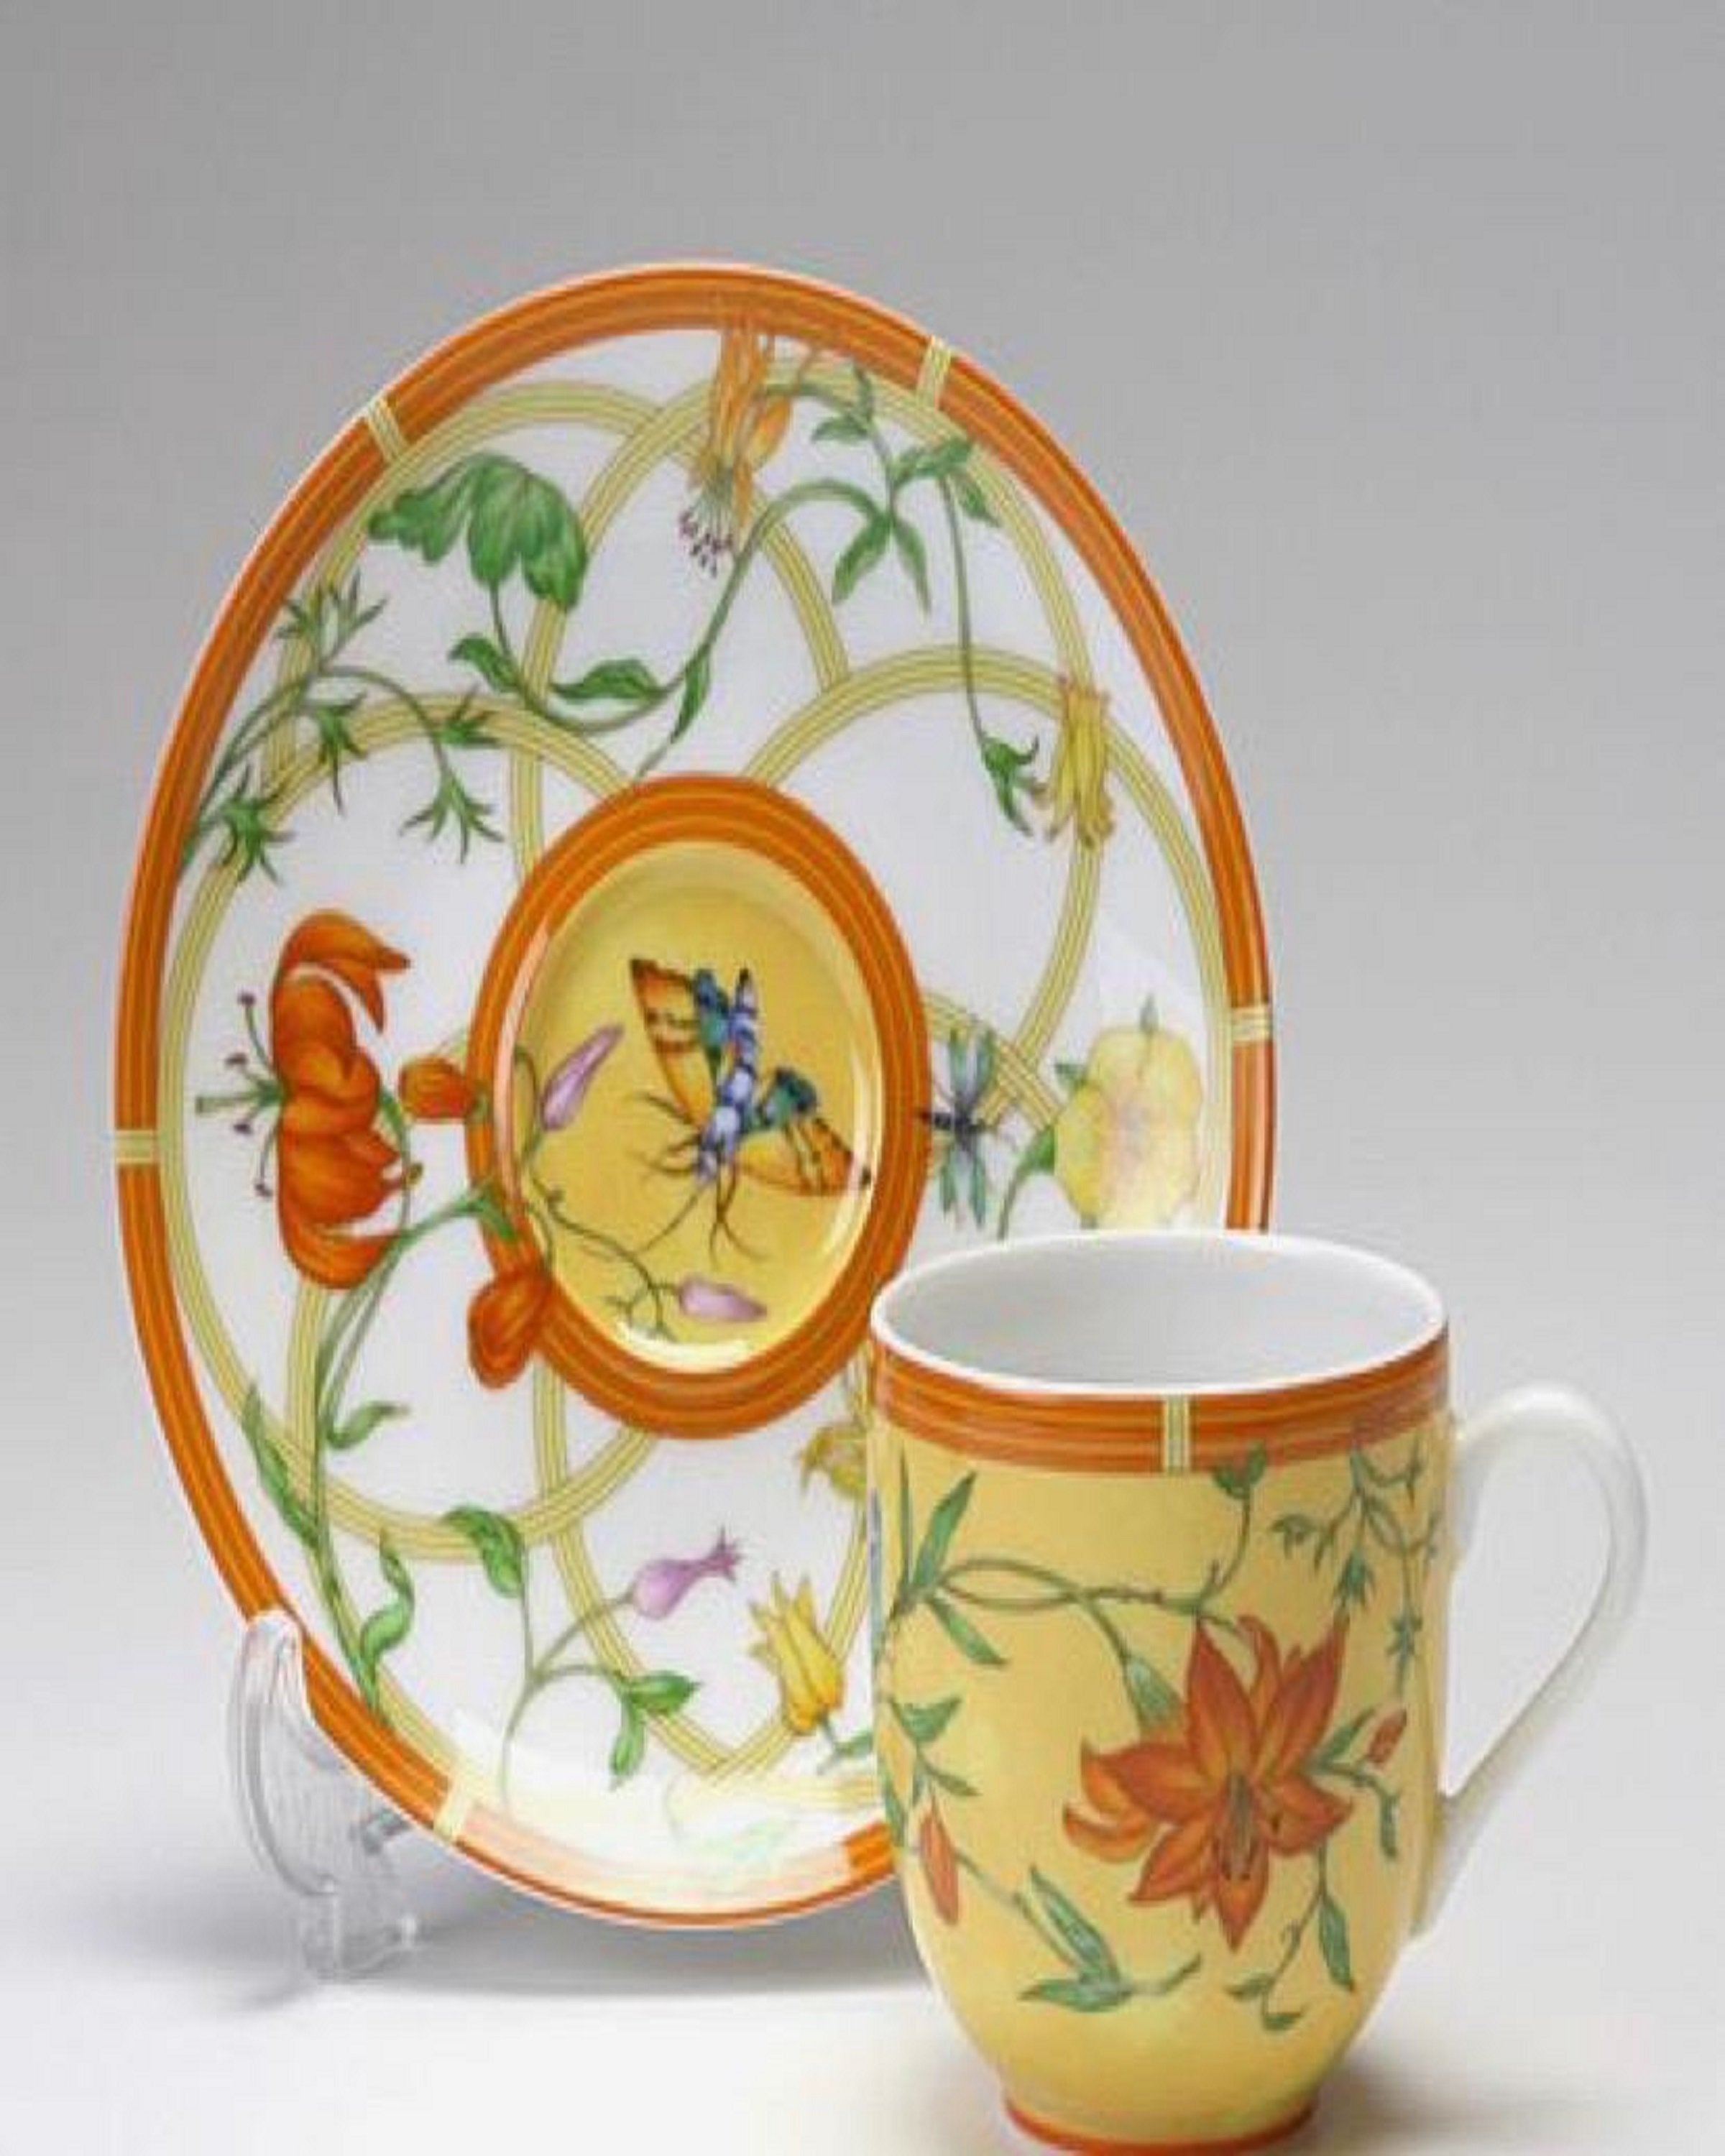 Buy Porcelain Cup And Saucers Online